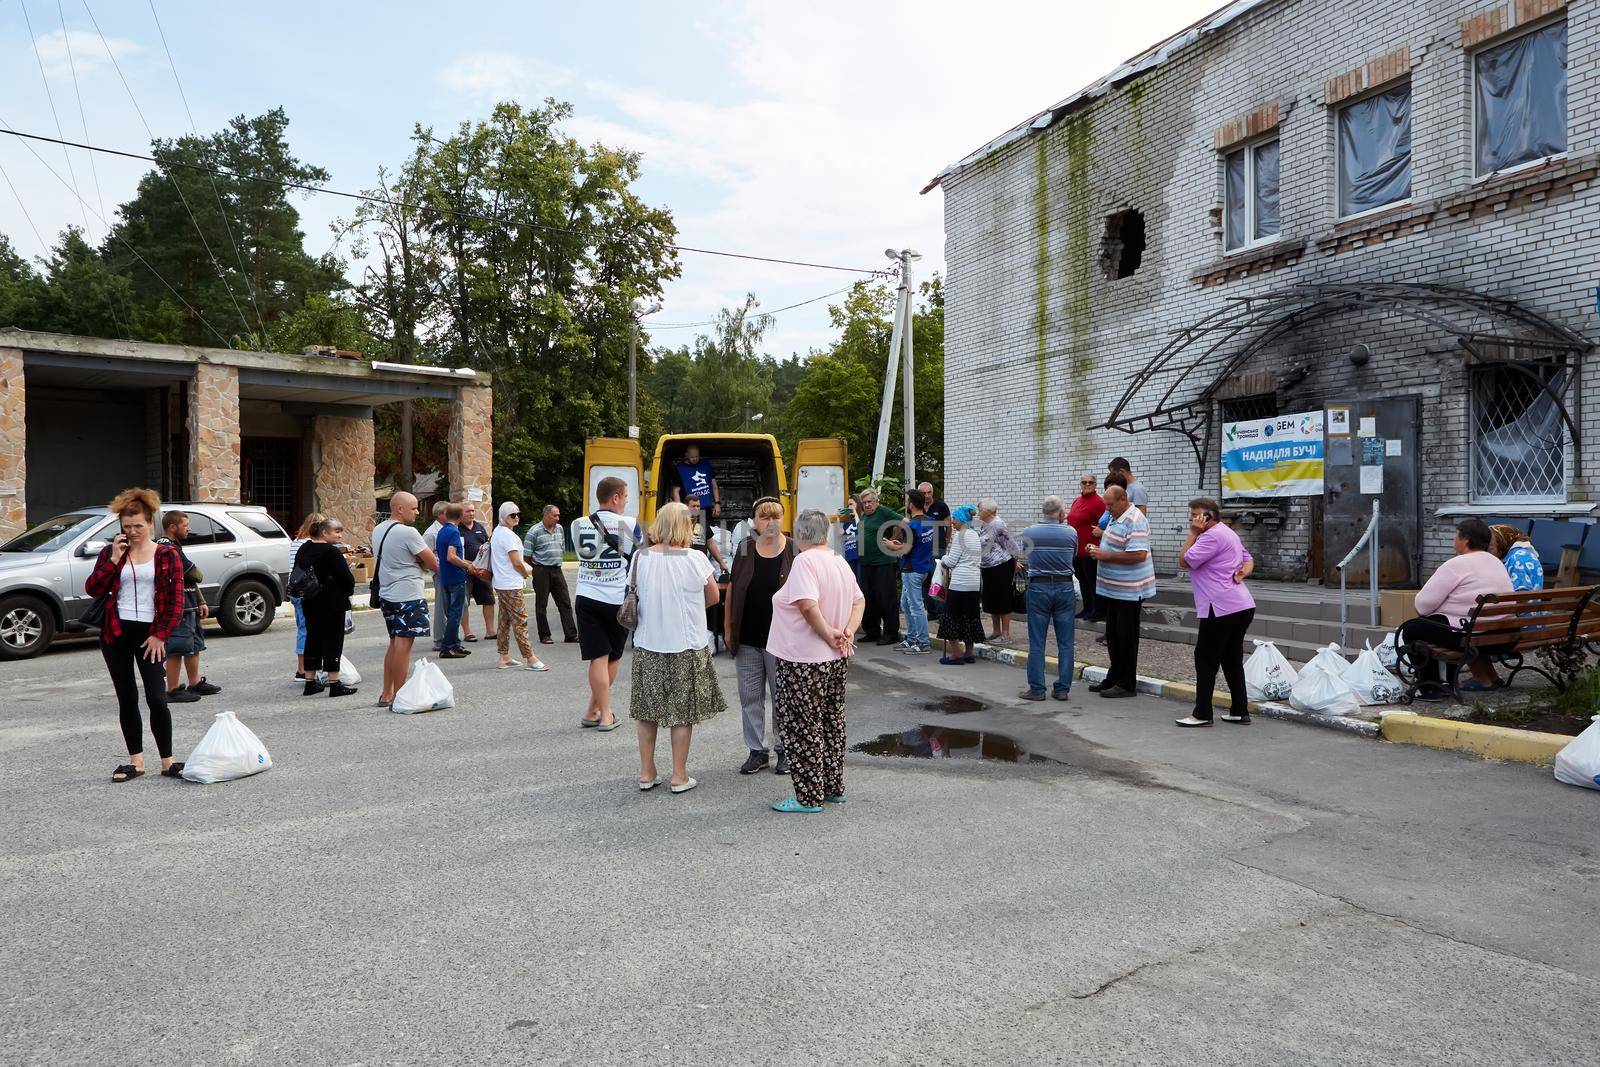 Moshchun, Ukraine - August 25, 2022: People take humanitarian aid from volunteers. The trace from a tank shot on the house. Words on the sign: Moshchun.